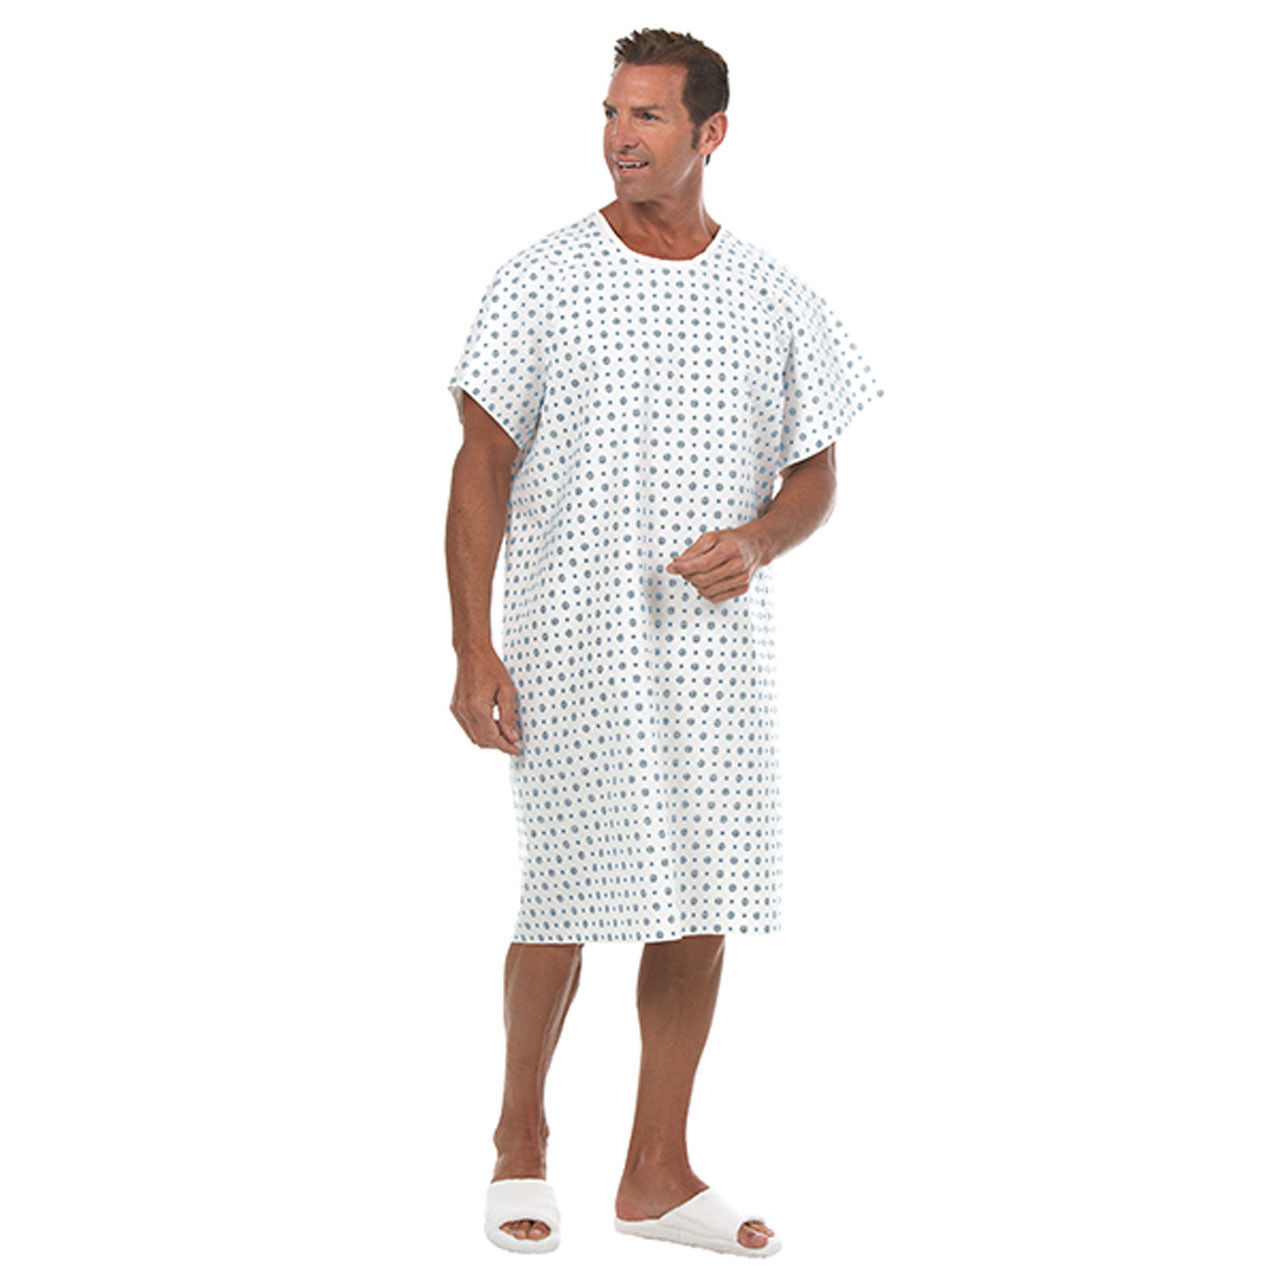 How is the facial gown wholesale fastened before purchase?